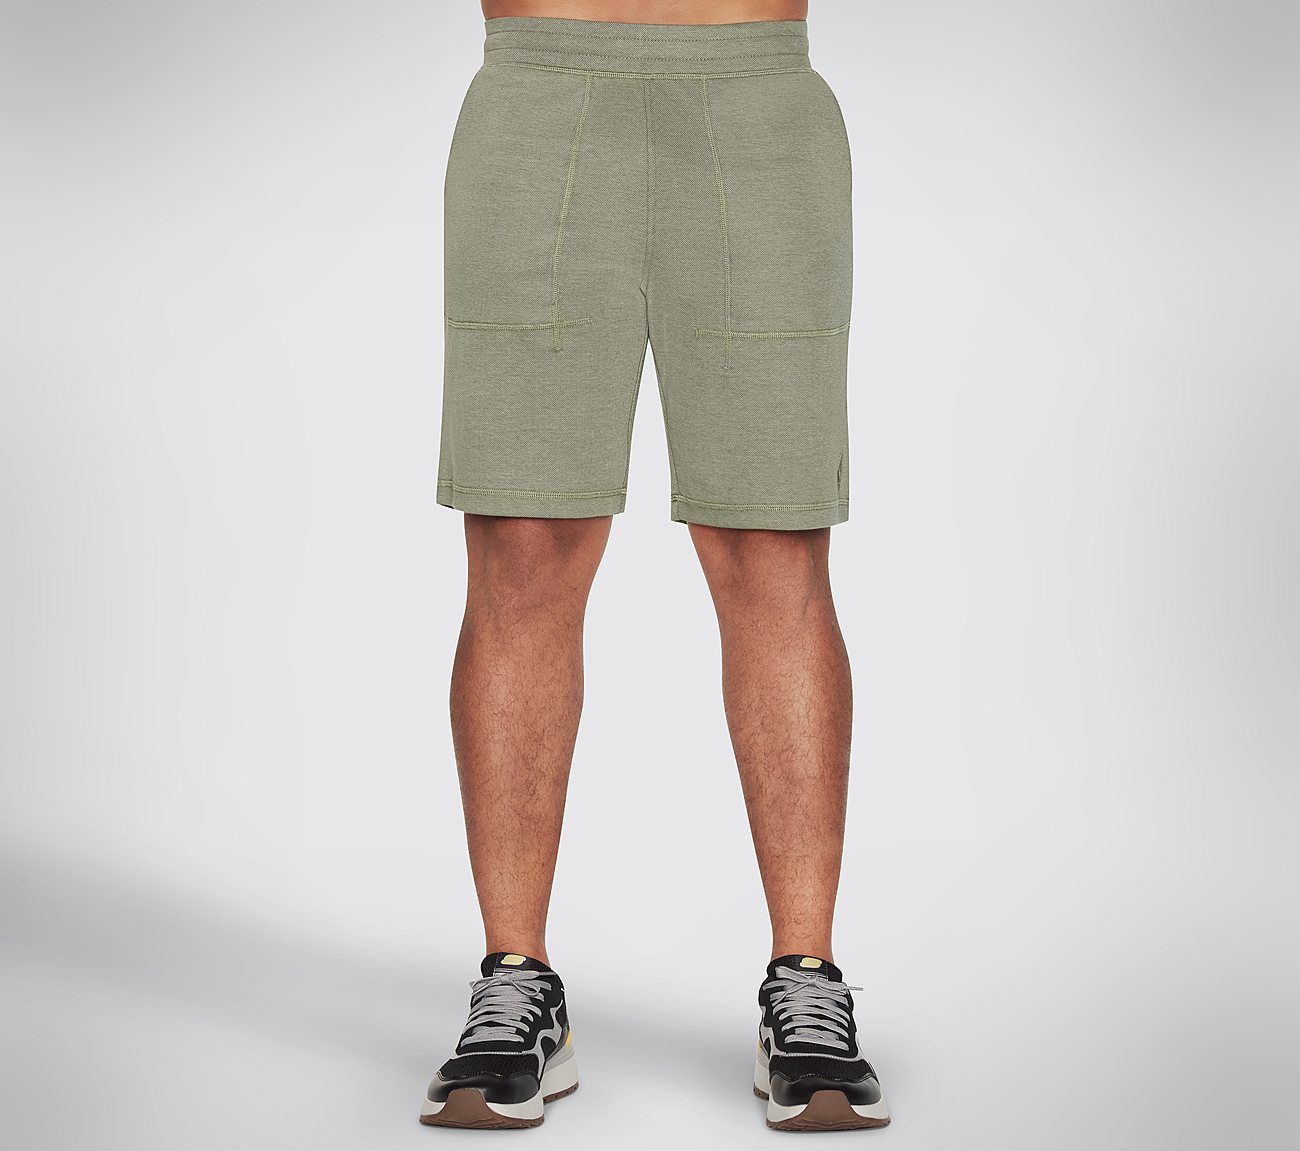 GOKNIT PIQUE 9IN SHORT, LIGHT GREY/GREEN Apparels Lateral View